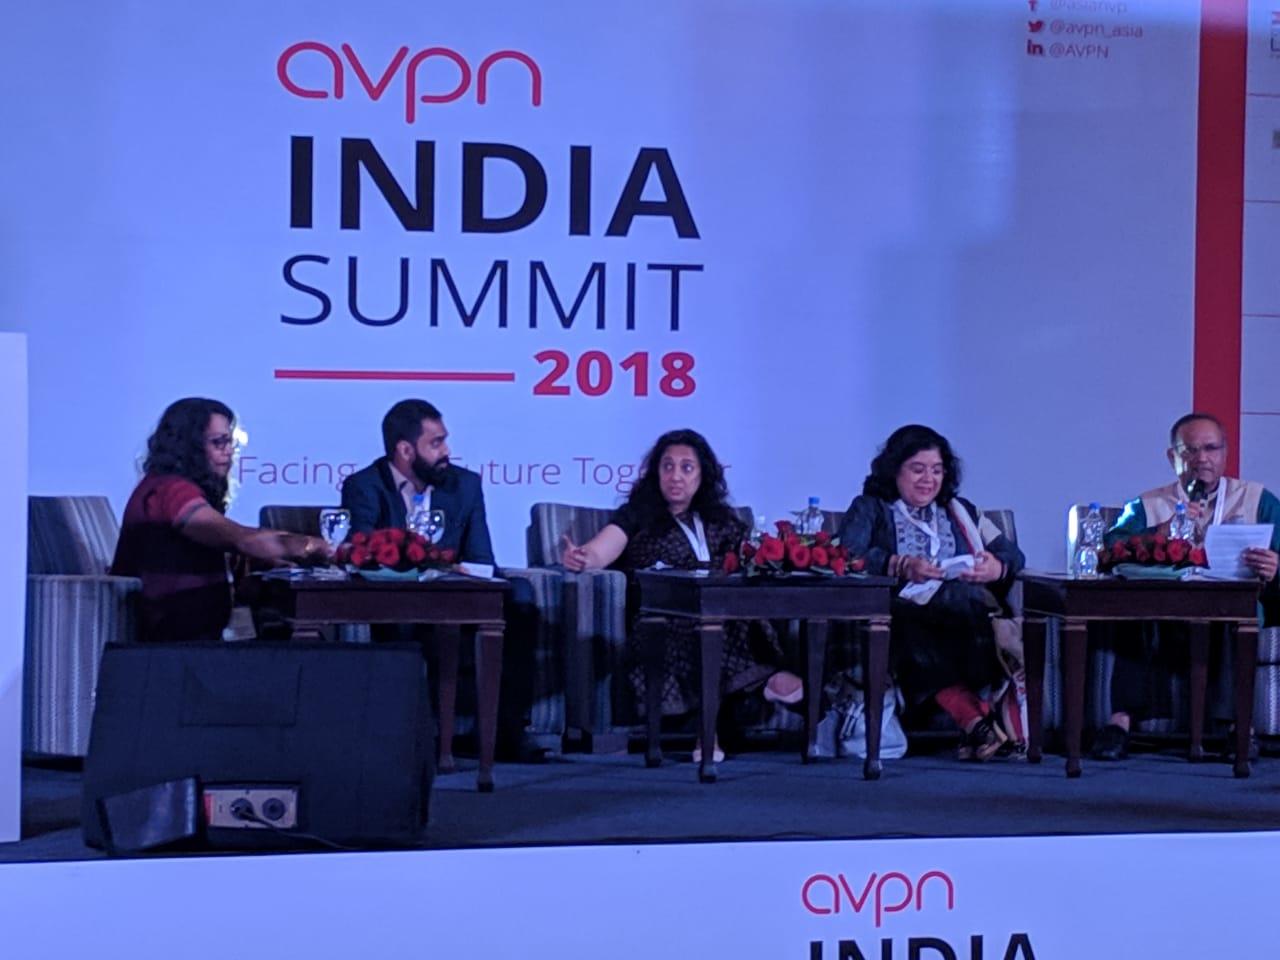 Panel Discussion at the AVPN India Summit 2018